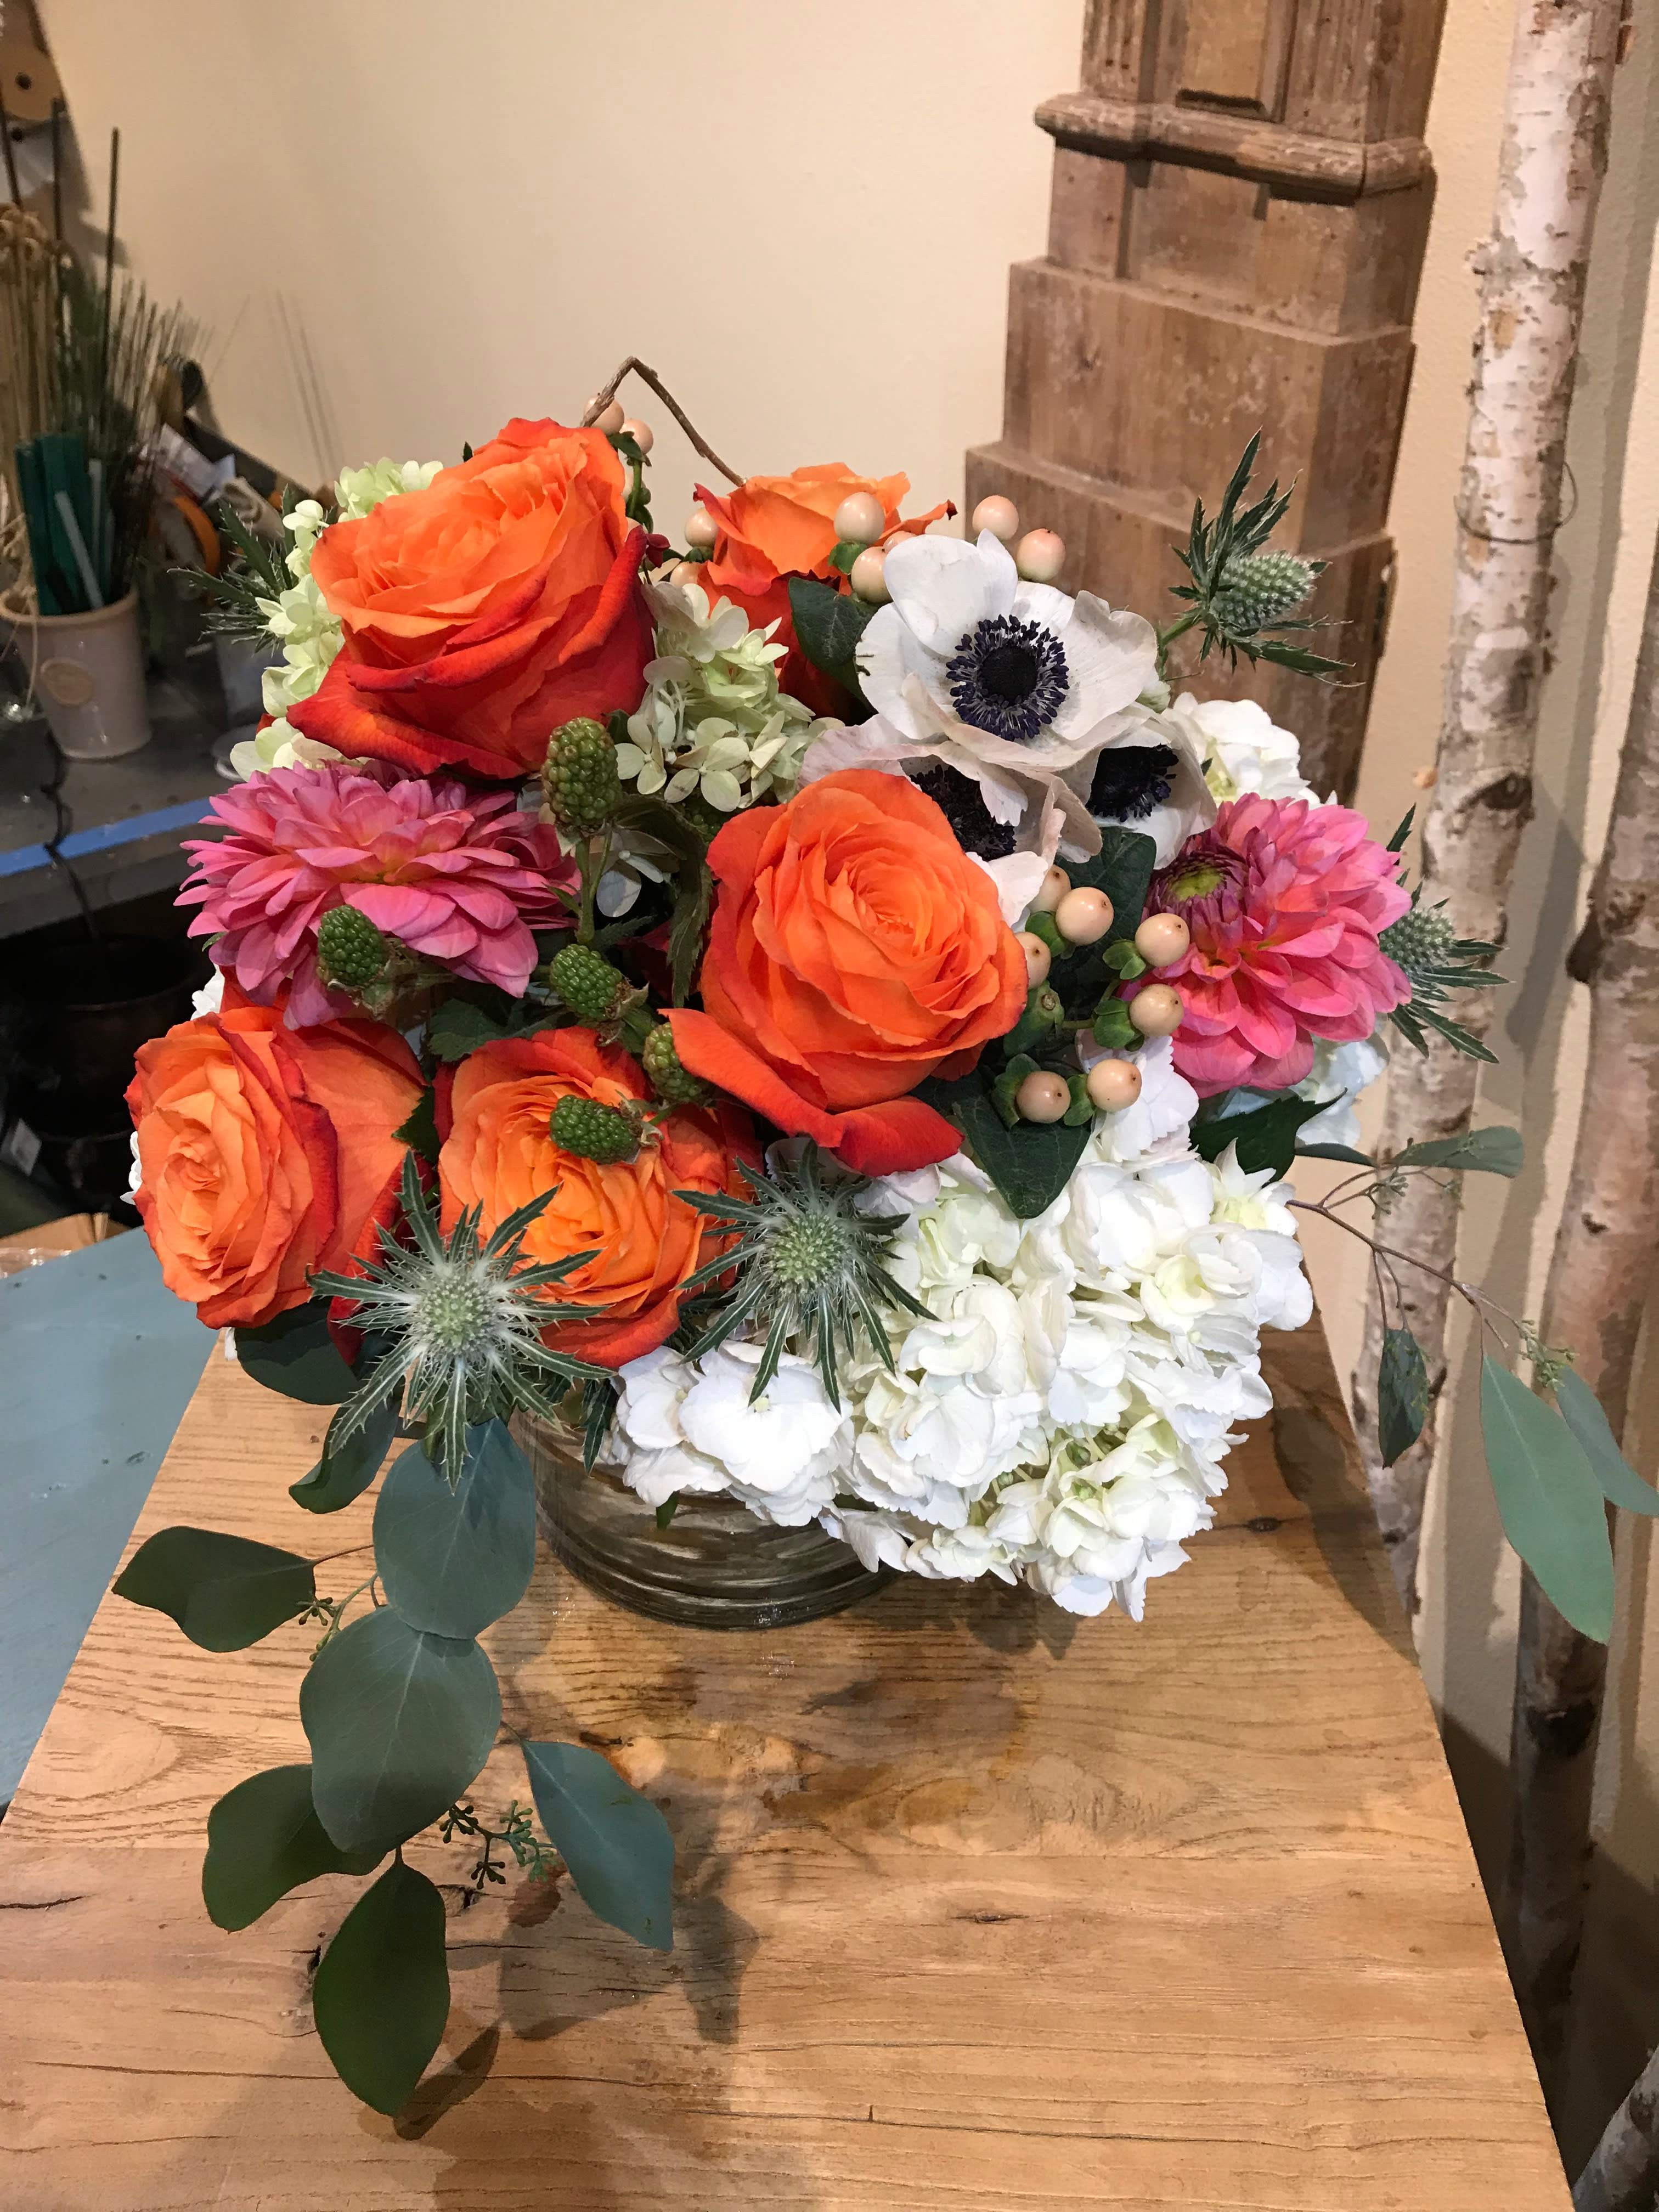 Brighten up in Tustin, CA | The Hive Floral Design Studio & Gifts